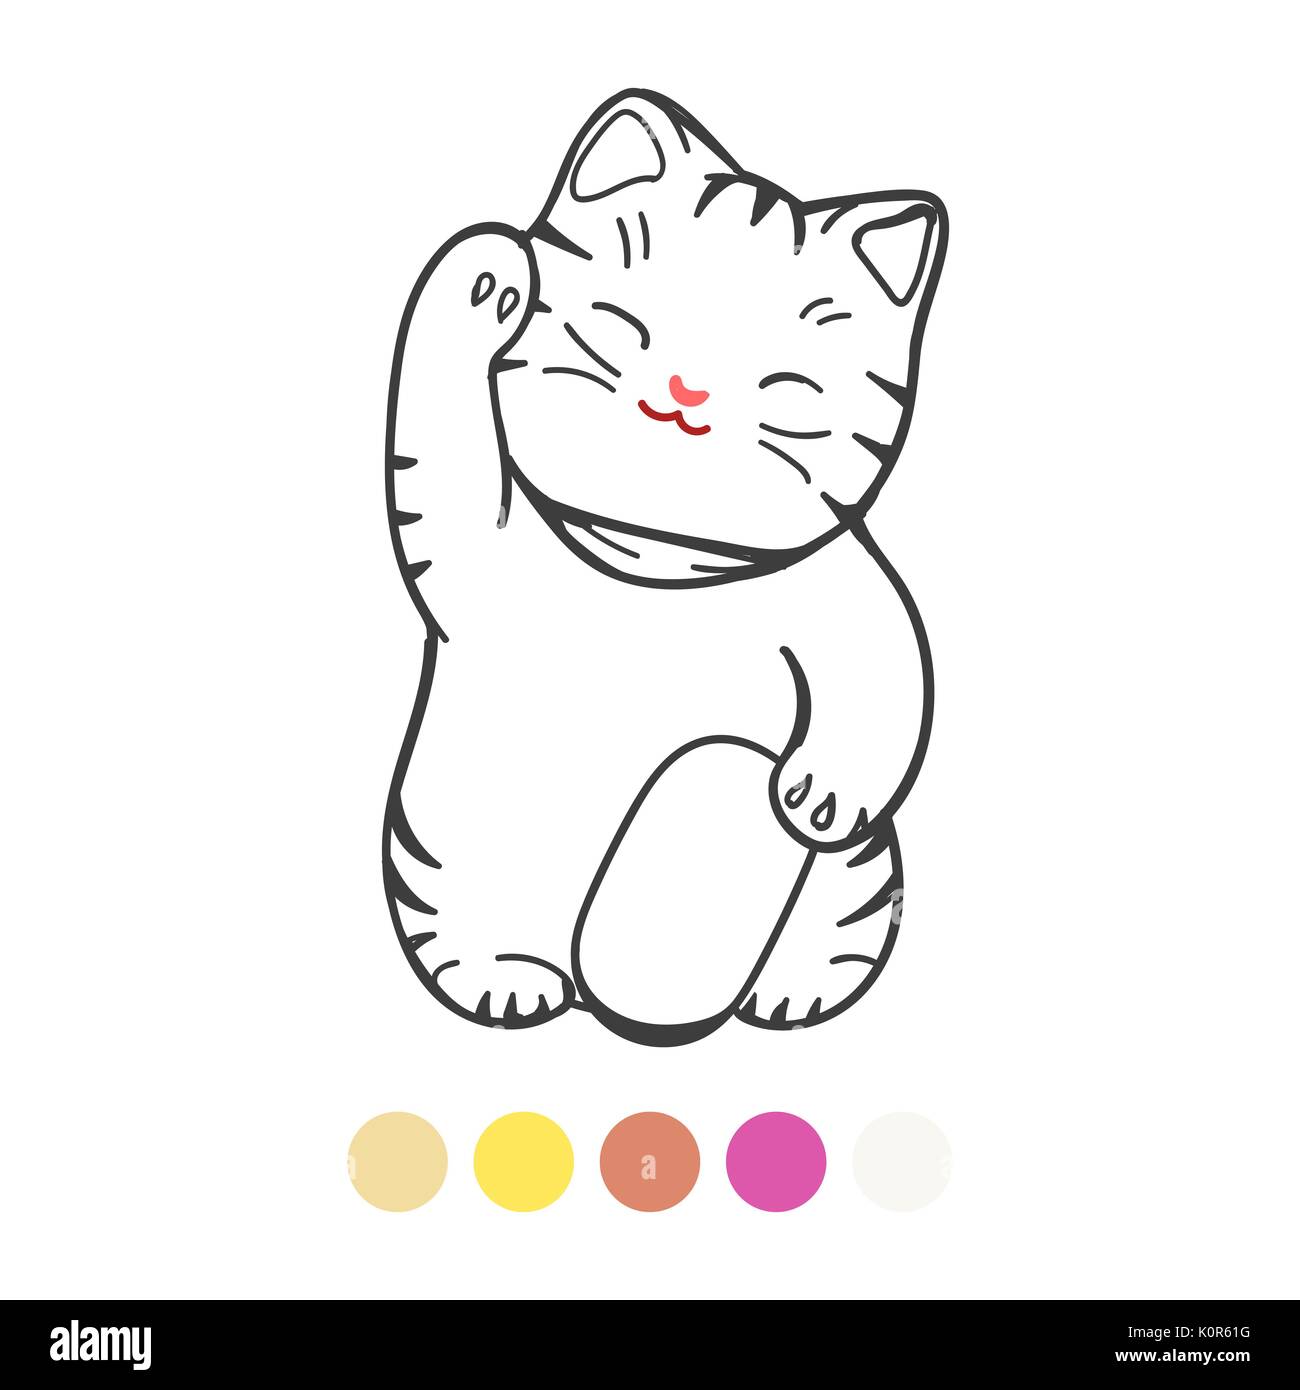 Coloring page for kids with colors sample, vector illustration. Cute kitten with toy Stock Vector